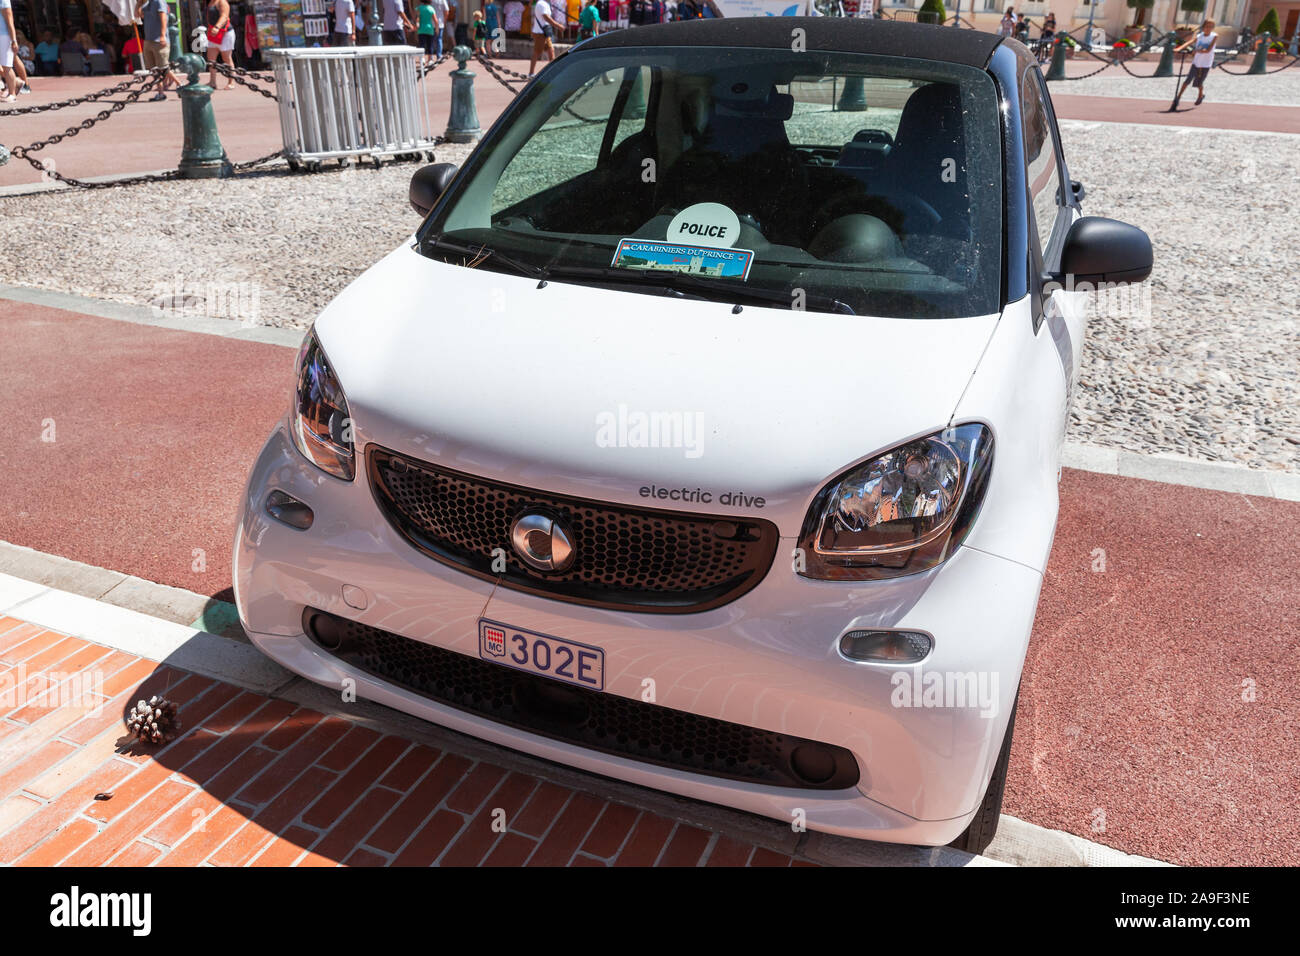 Monte Carlo, Monaco - August 15, 2018: White electric drive Smart car stands on a city square at sunny day, close up photo Stock Photo